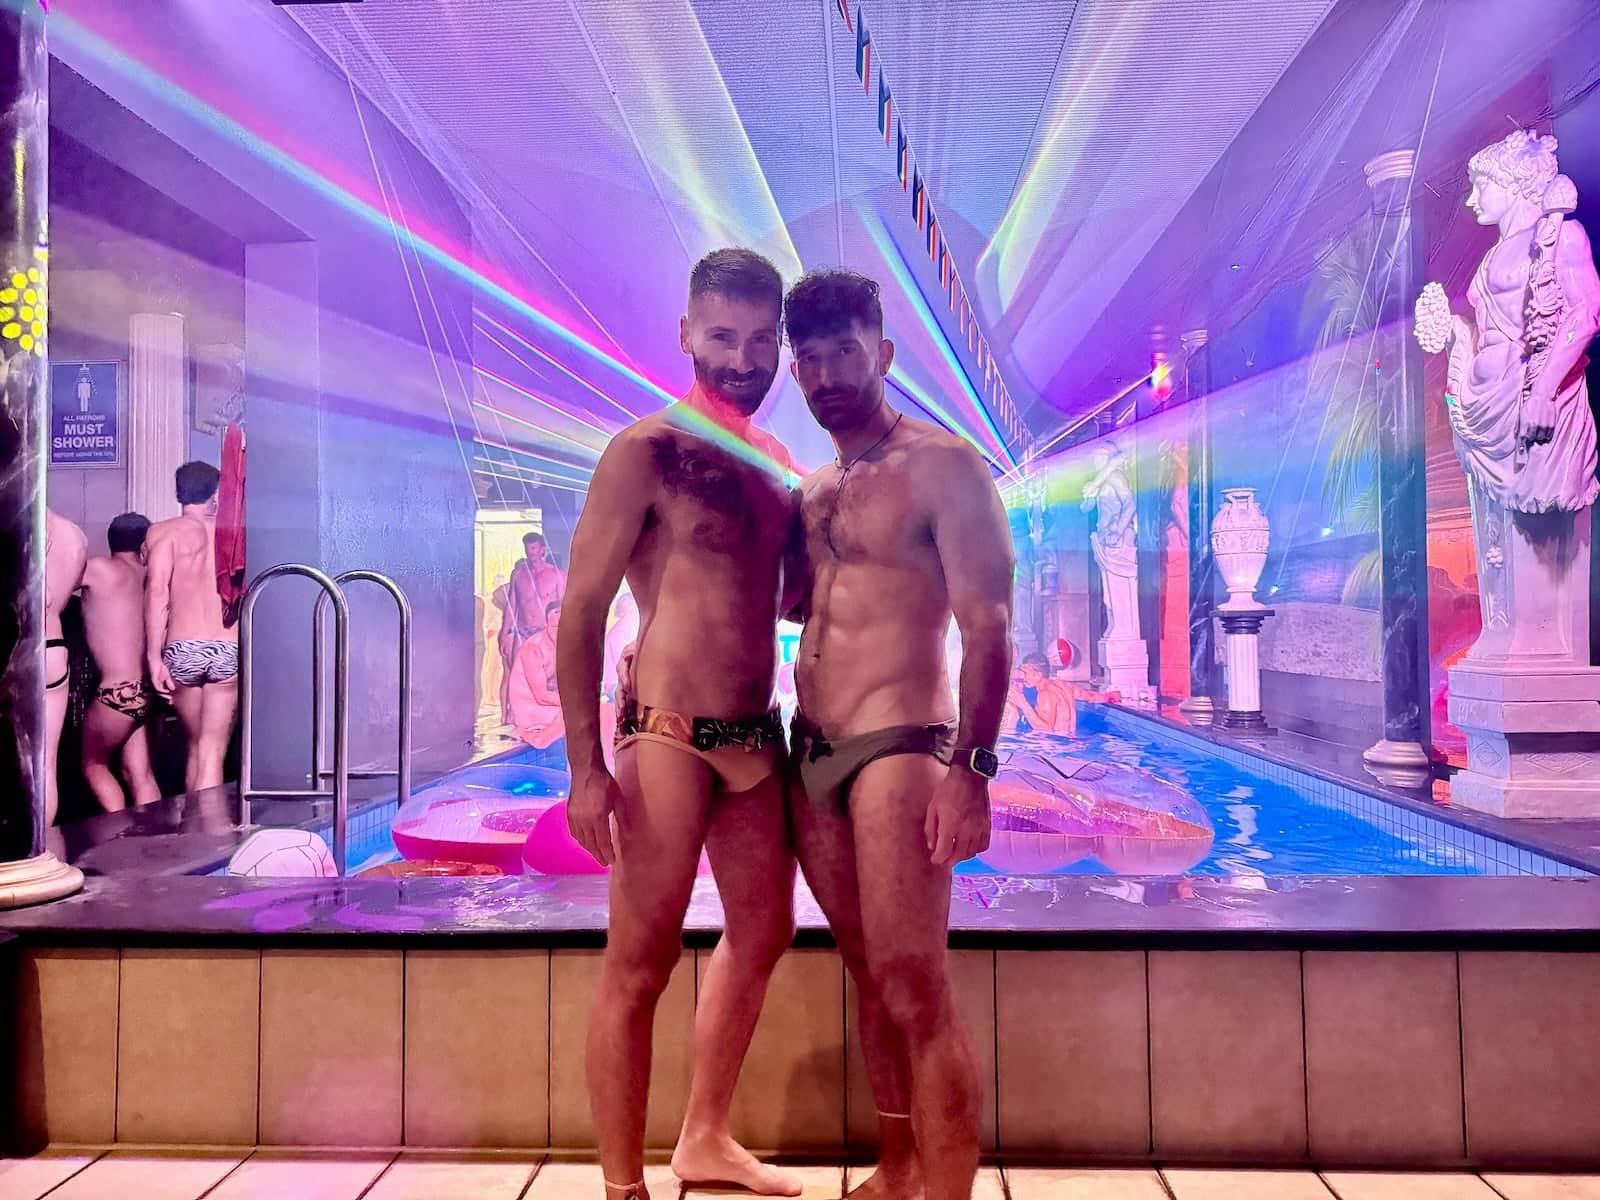 Pool Party at the Wet on Wellington gay sauna in Melbourne.